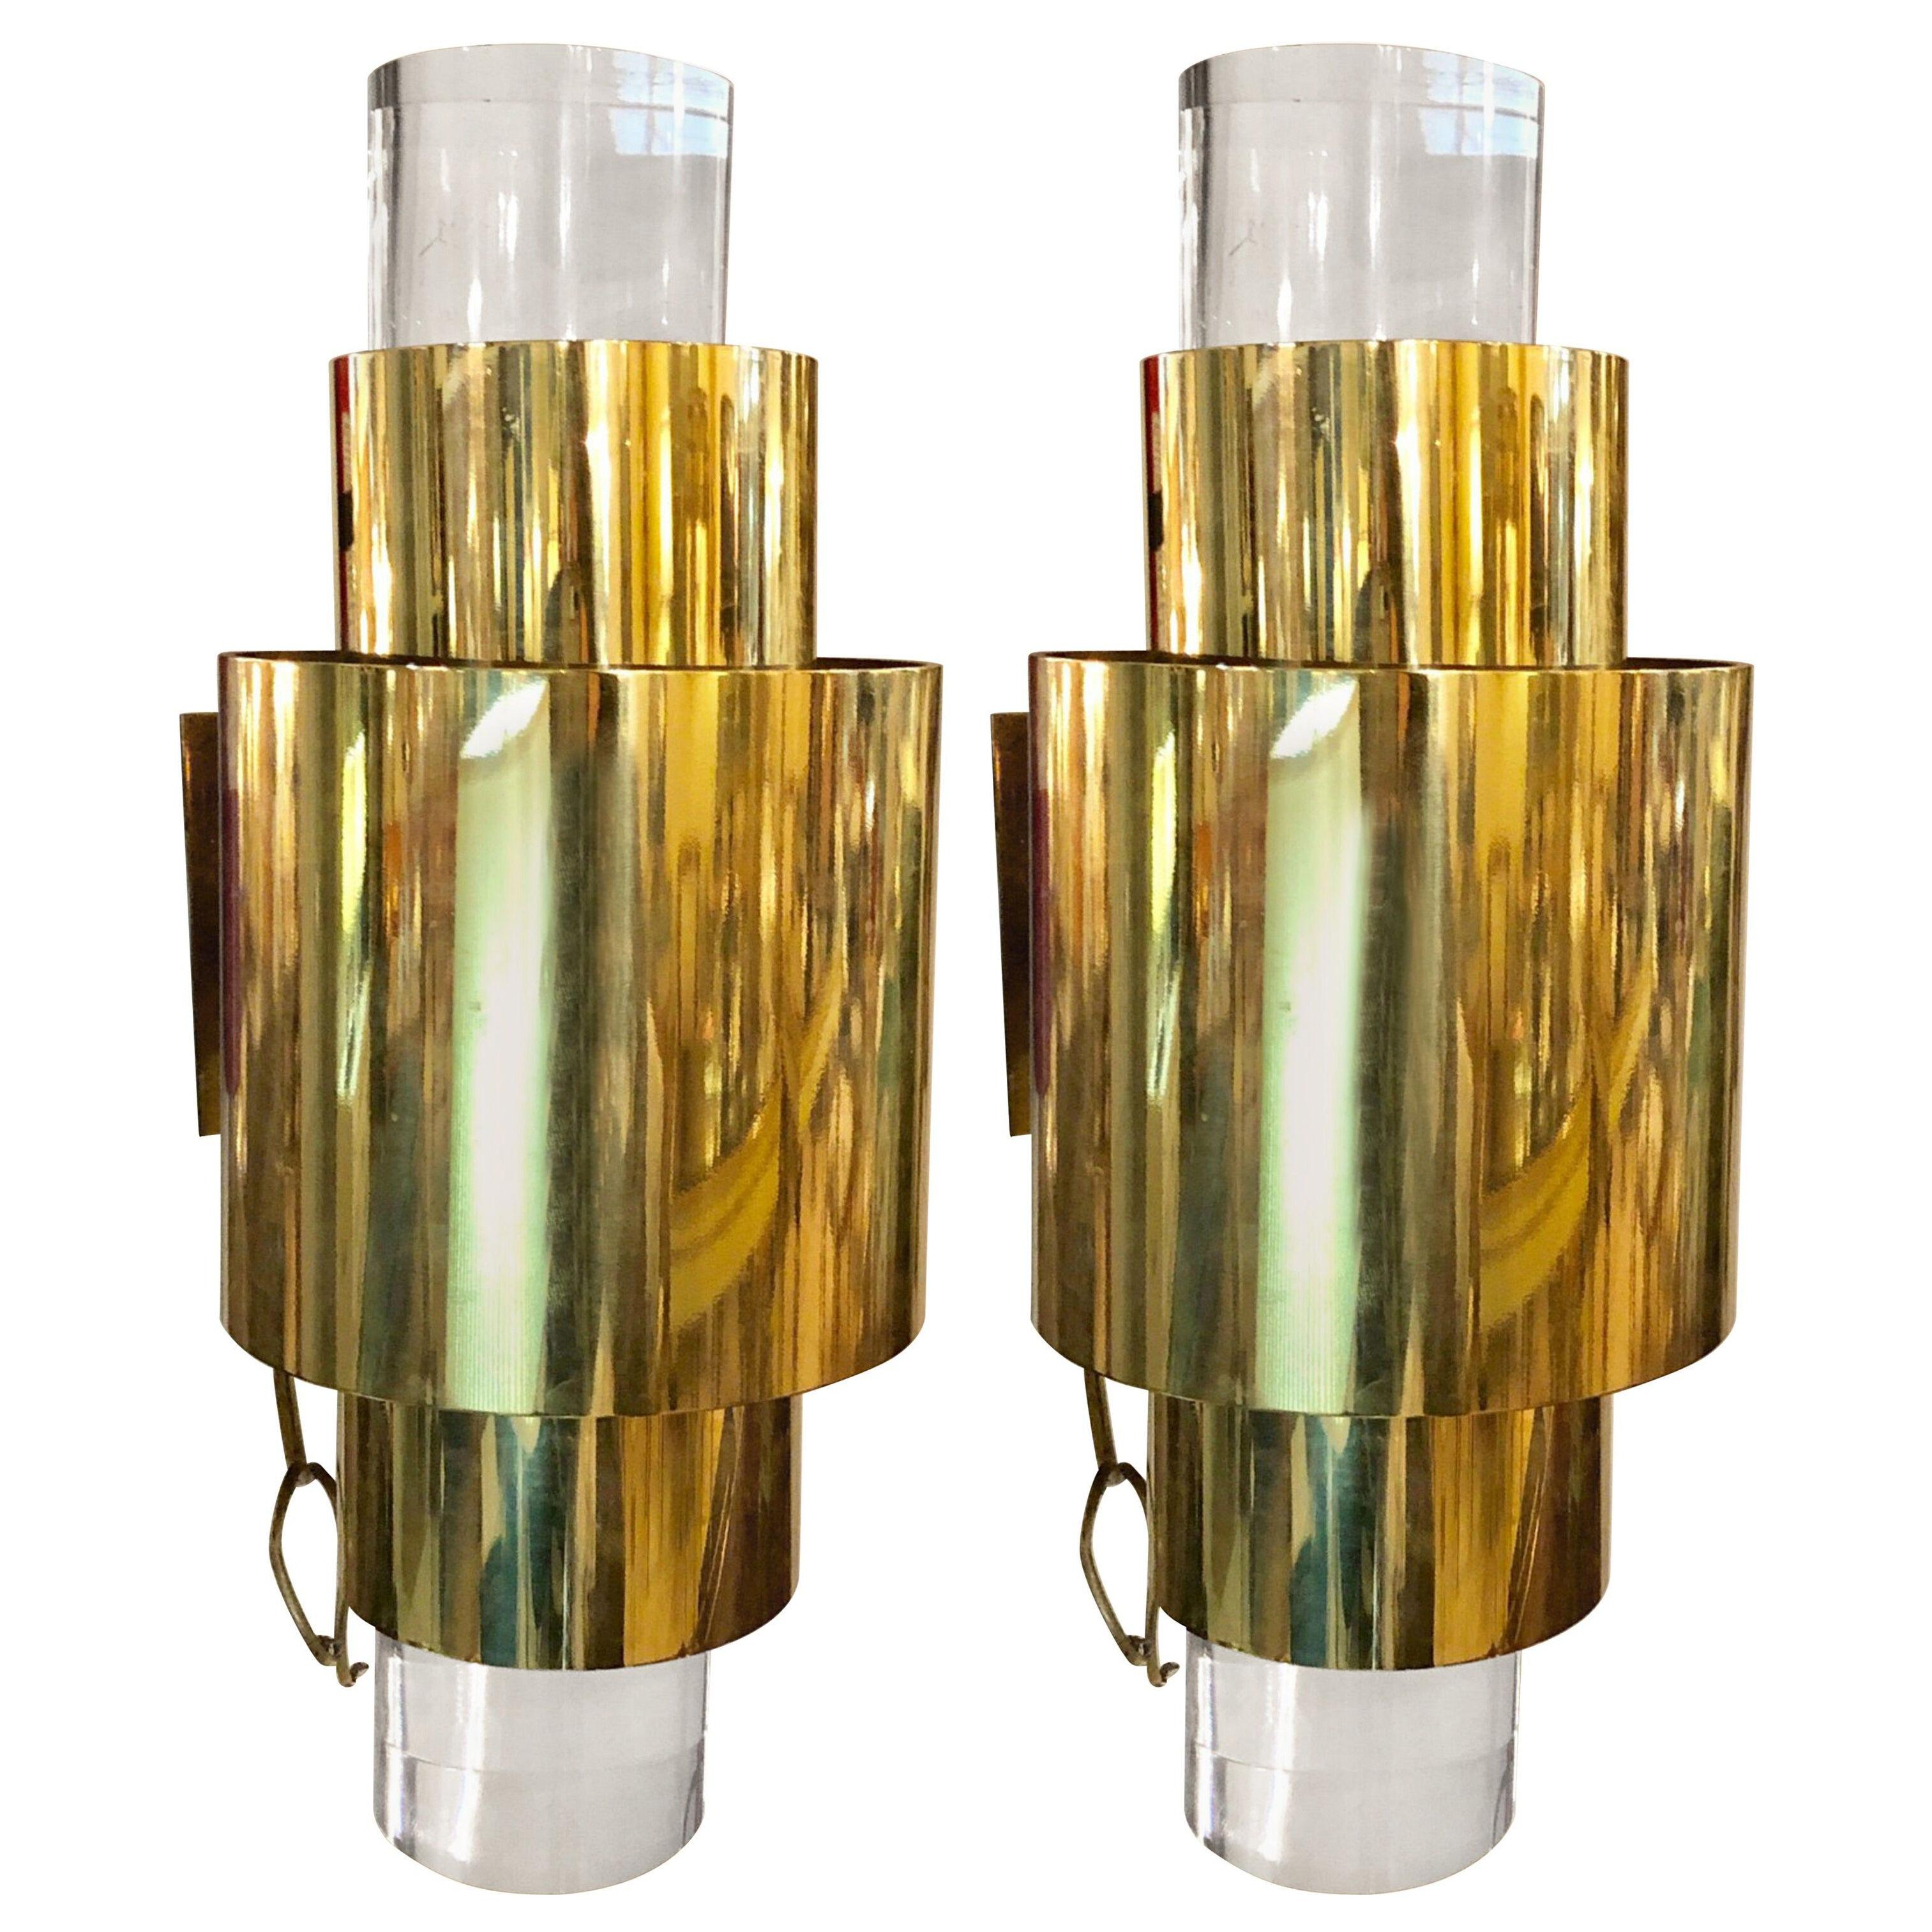 Pair of Mid-Century Modern Brass and Lucite Wall Sconces	